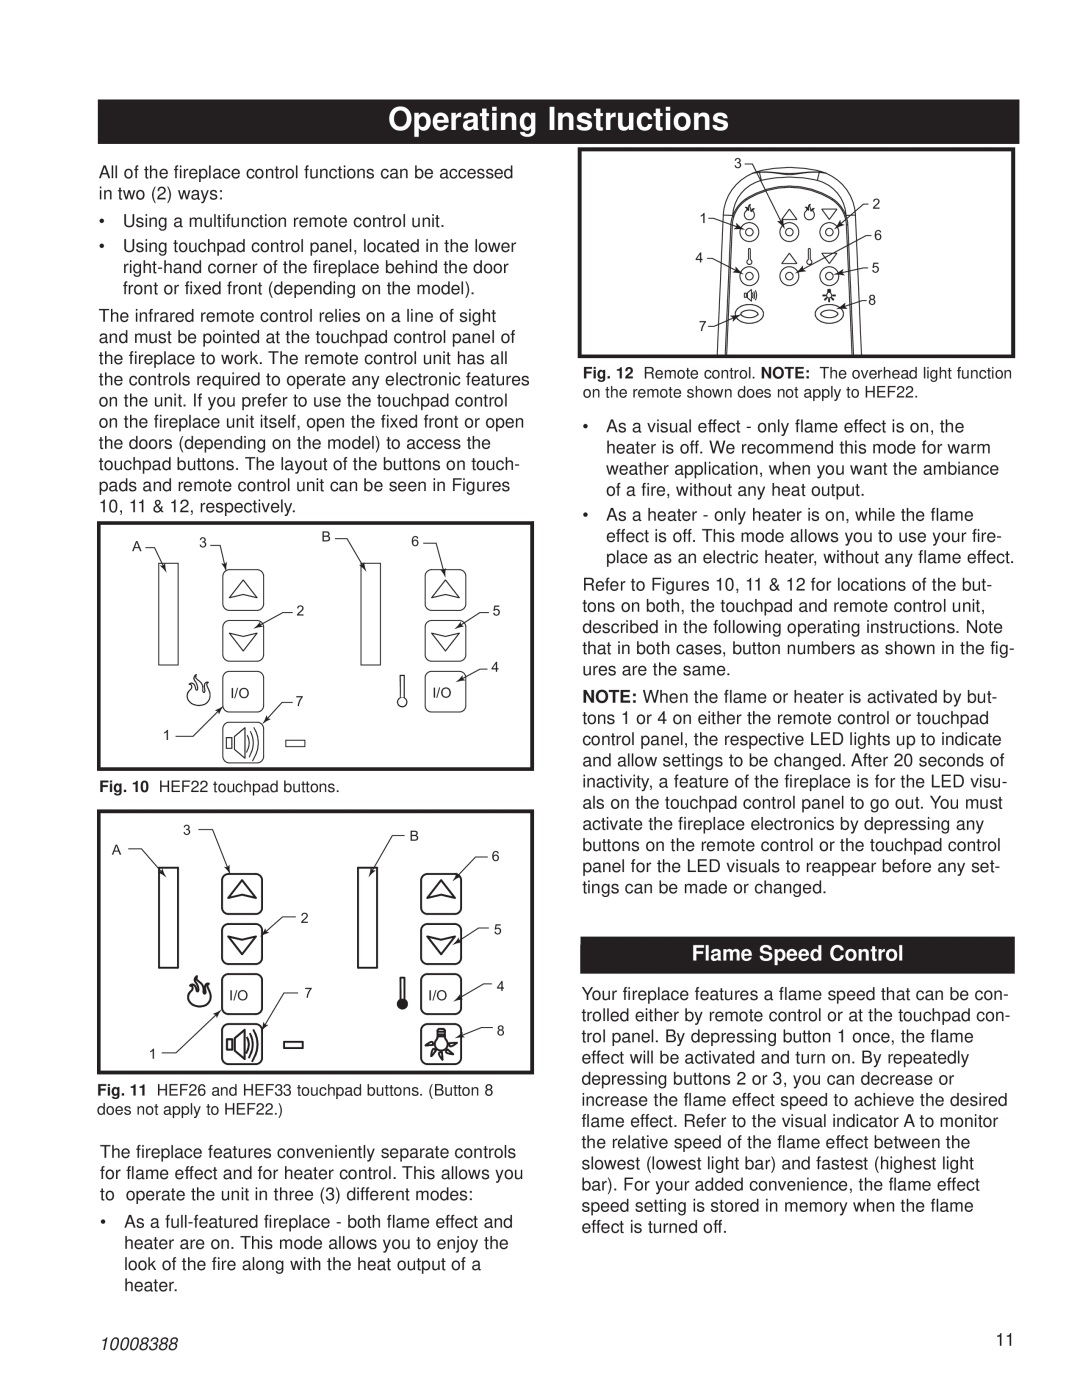 CFM Corporation HEF26, HEF33 installation instructions Operating Instructions, Flame Speed Control, 10008388 